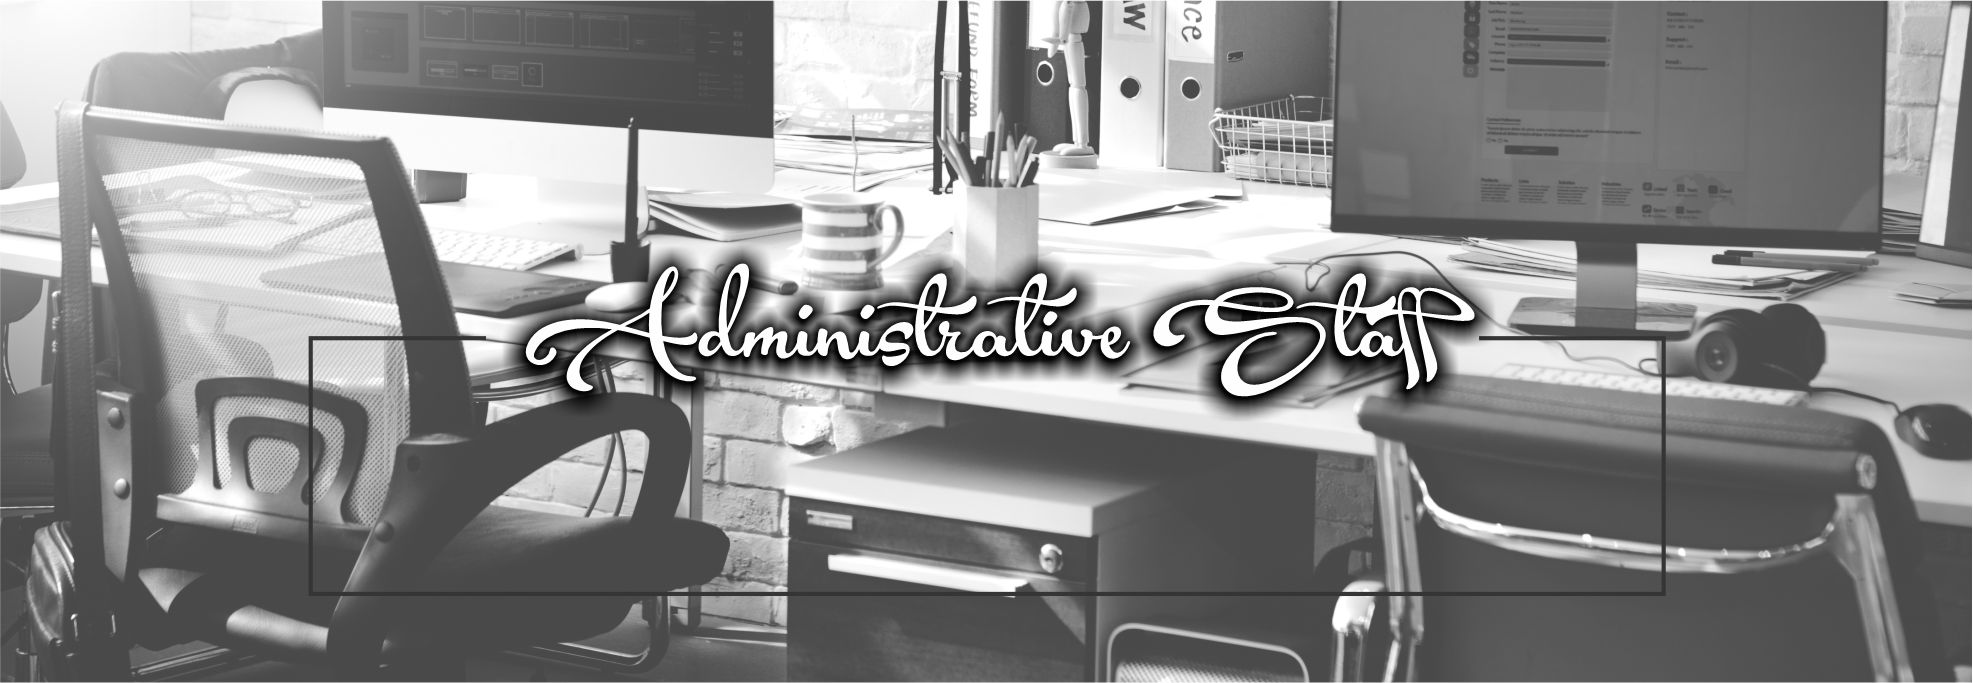  A black and white photo of an office with the words 'Administrative Staff' written in the center.